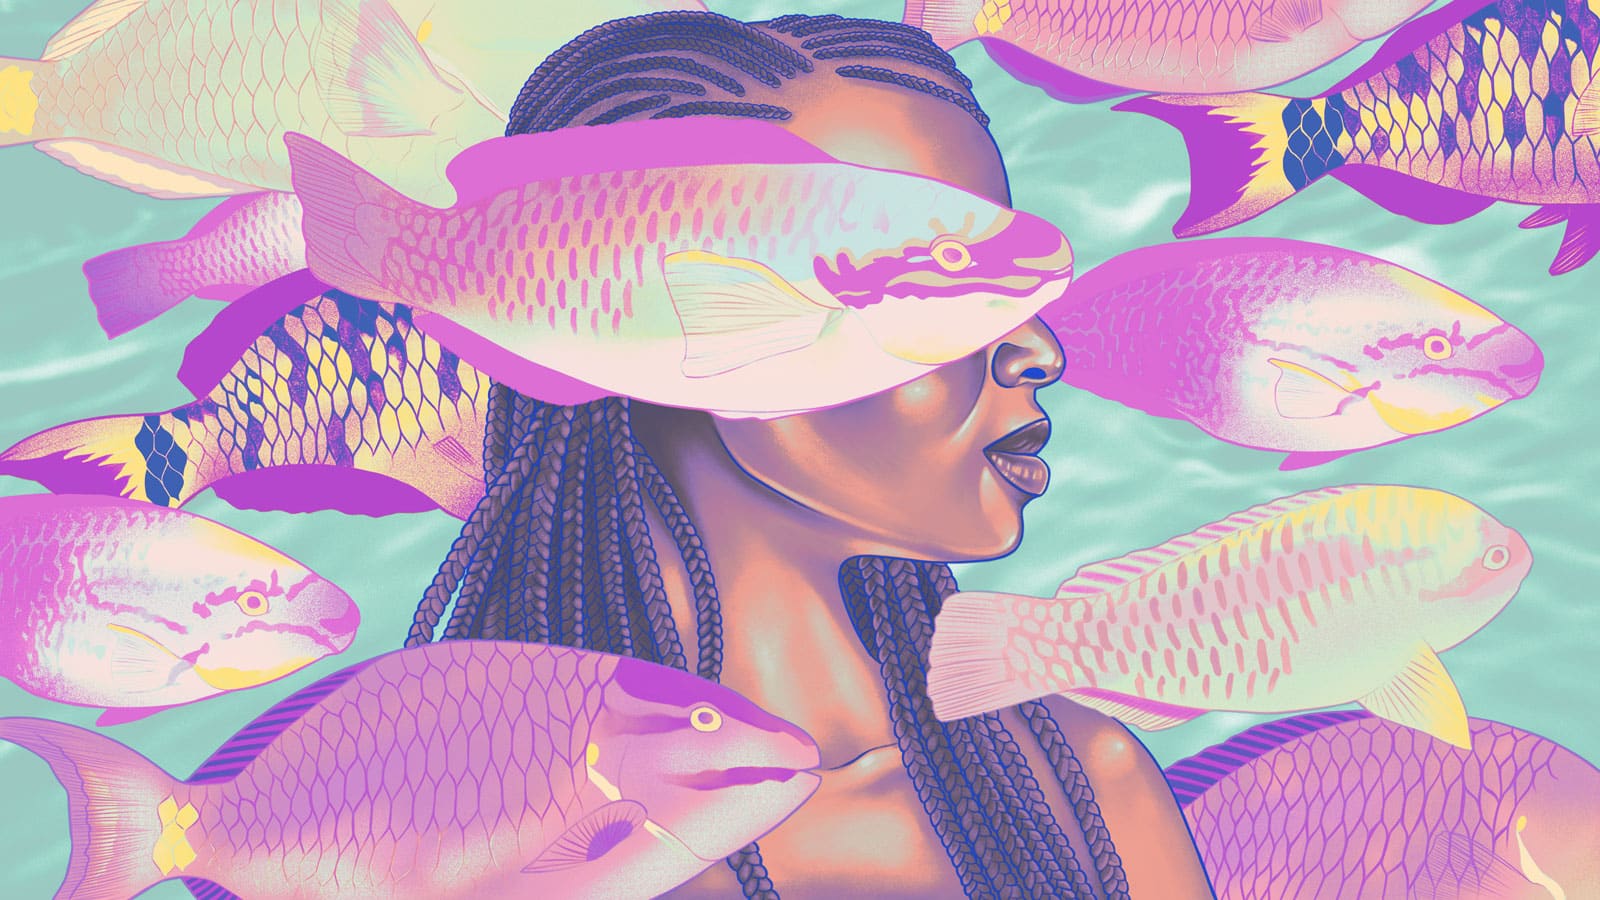 Art of a woman with long dark braids. She is in turquoise water, surrounded by pink, blue, and purple fish. One swims in front of her, covering her eyes.